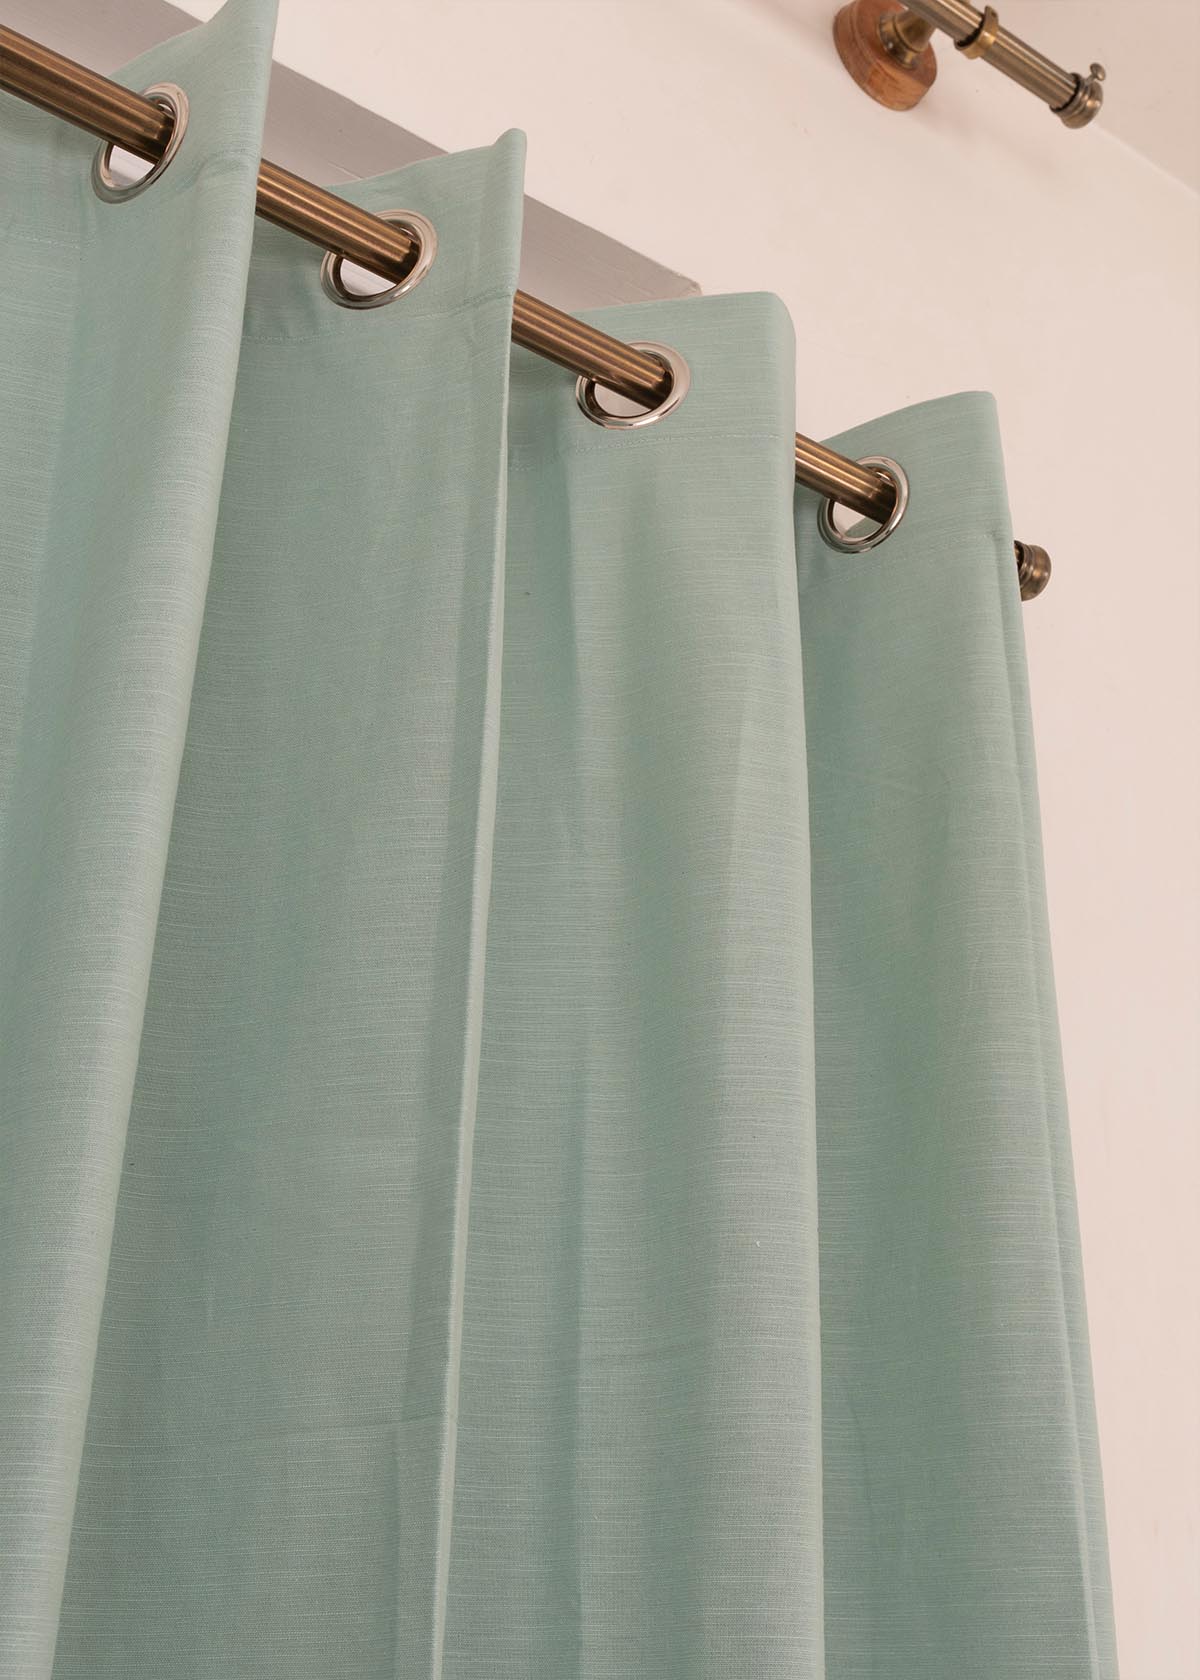 Solid Nile Blue 100% cotton plain curtain for bedroom - Room darkening - Pack of 1